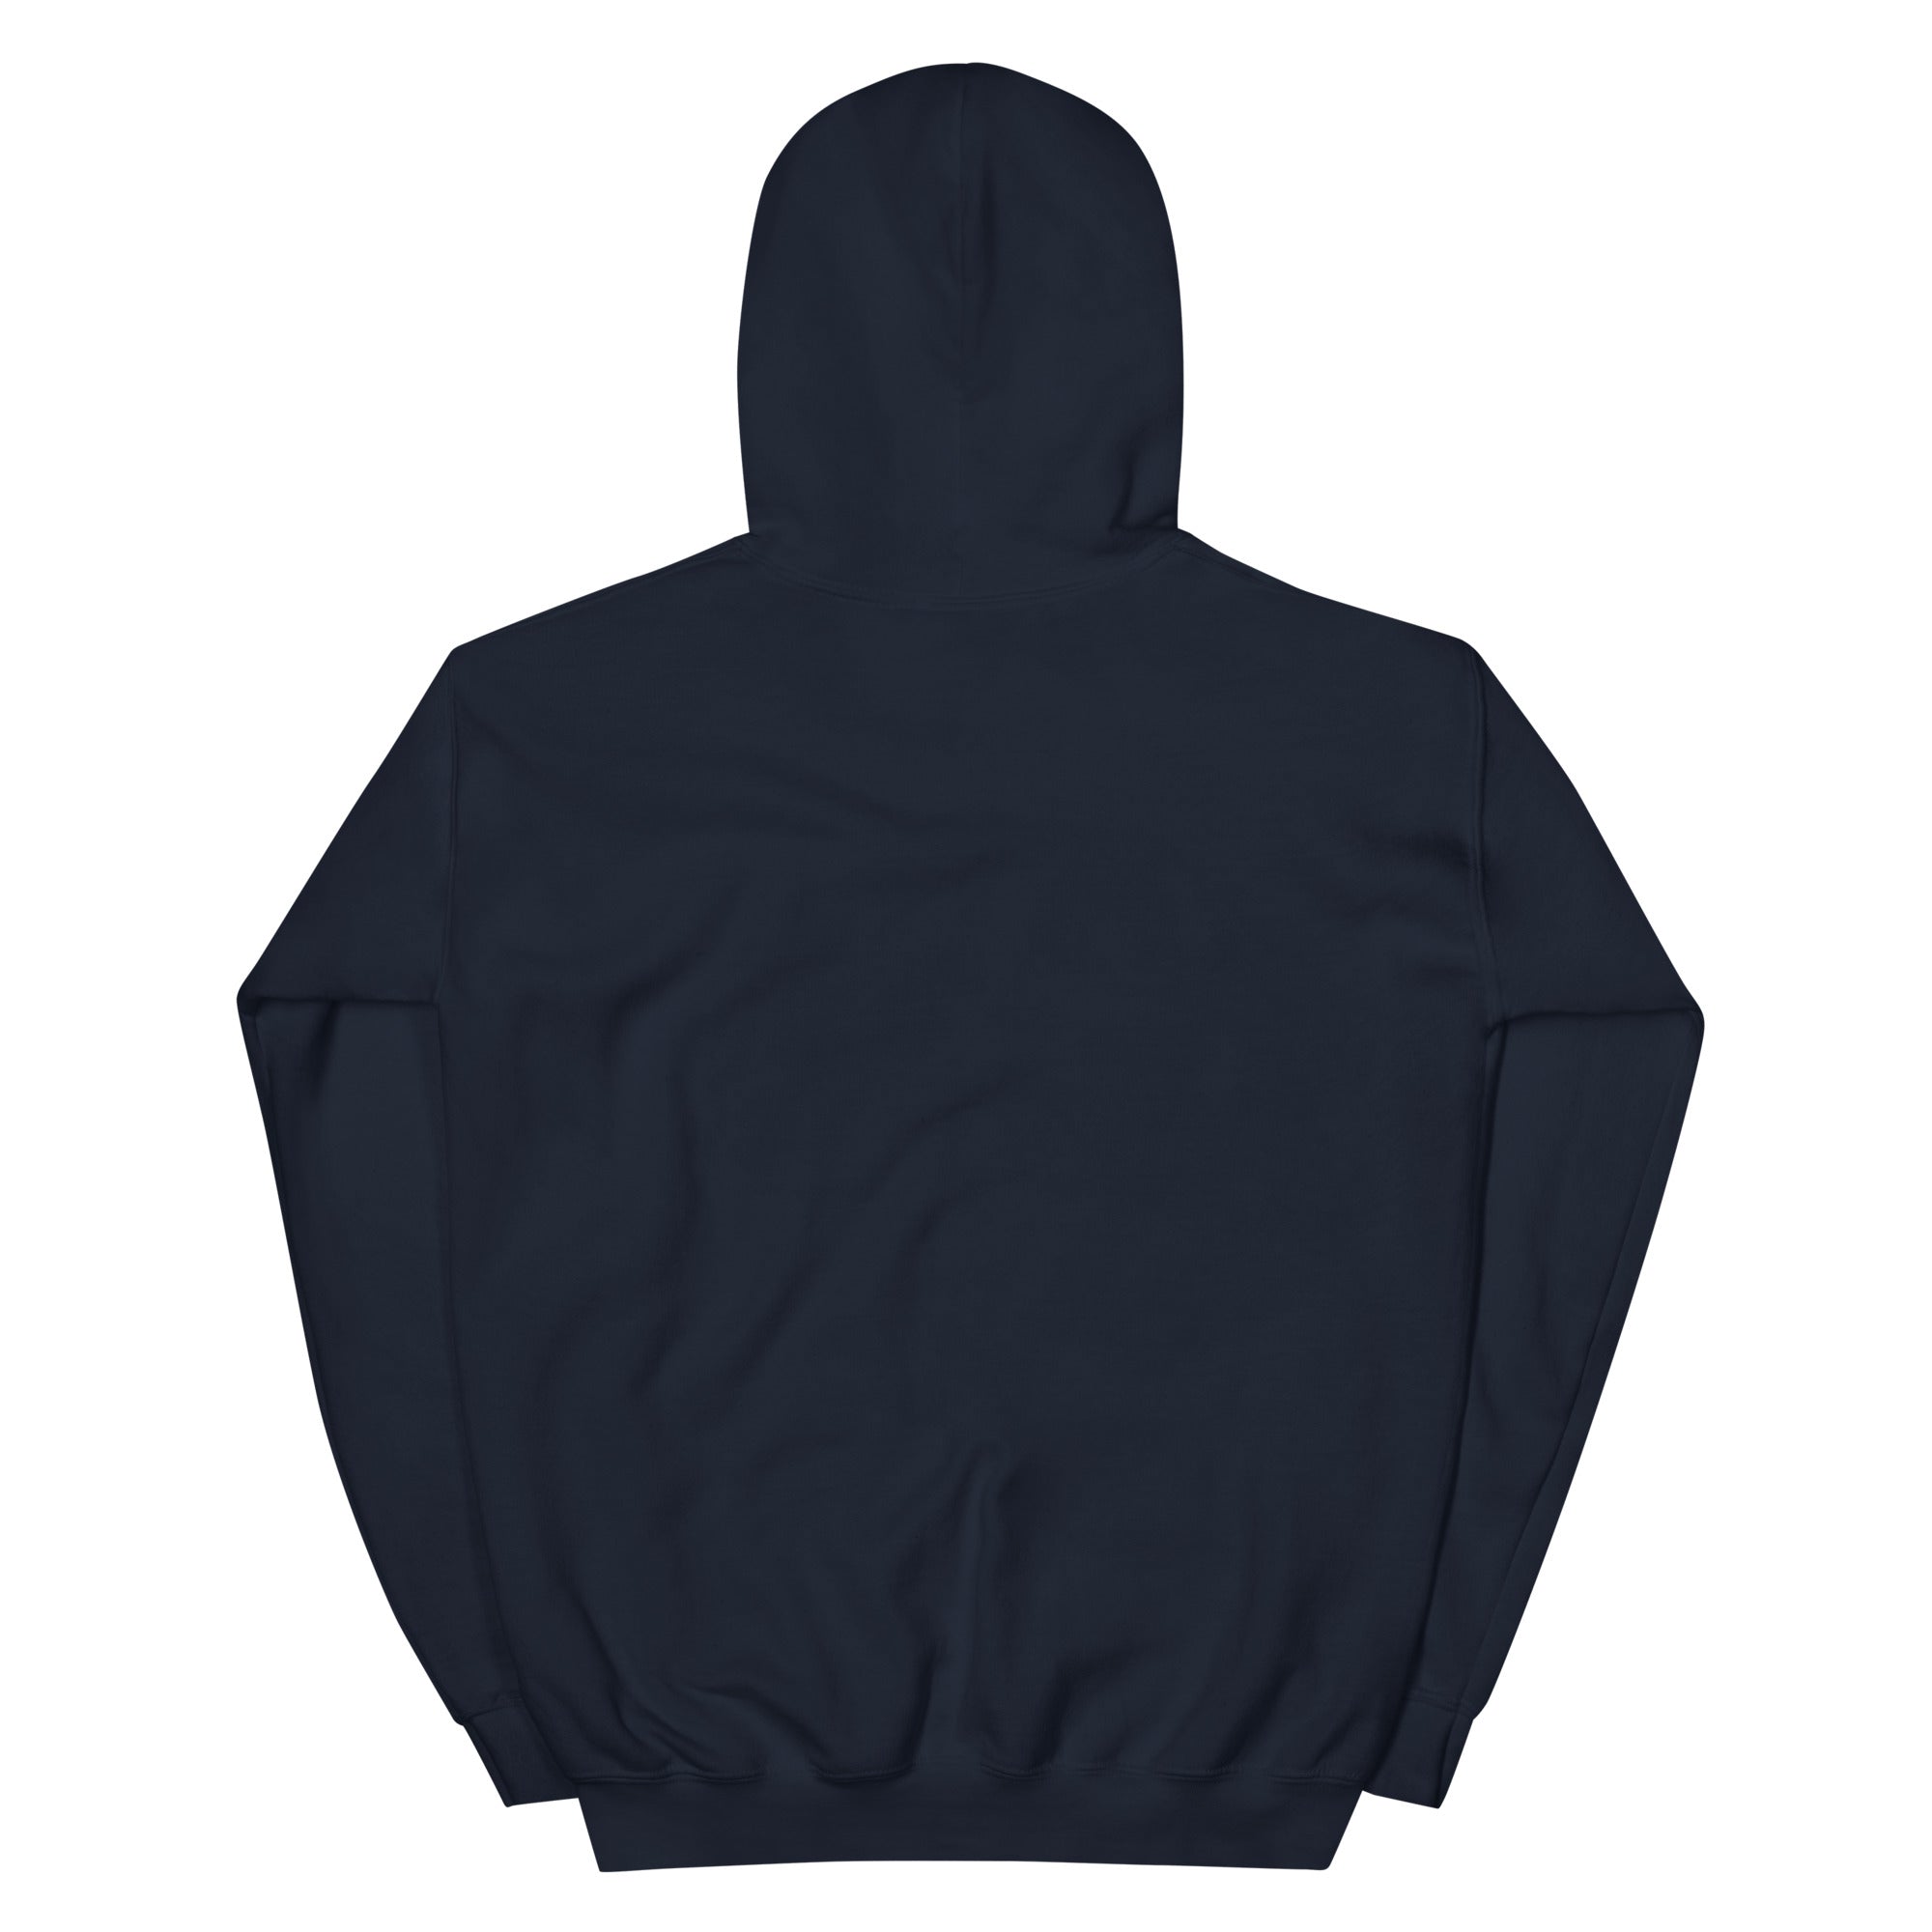 Rugby Imports Roger Williams RFC Heavy Blend Hoodie